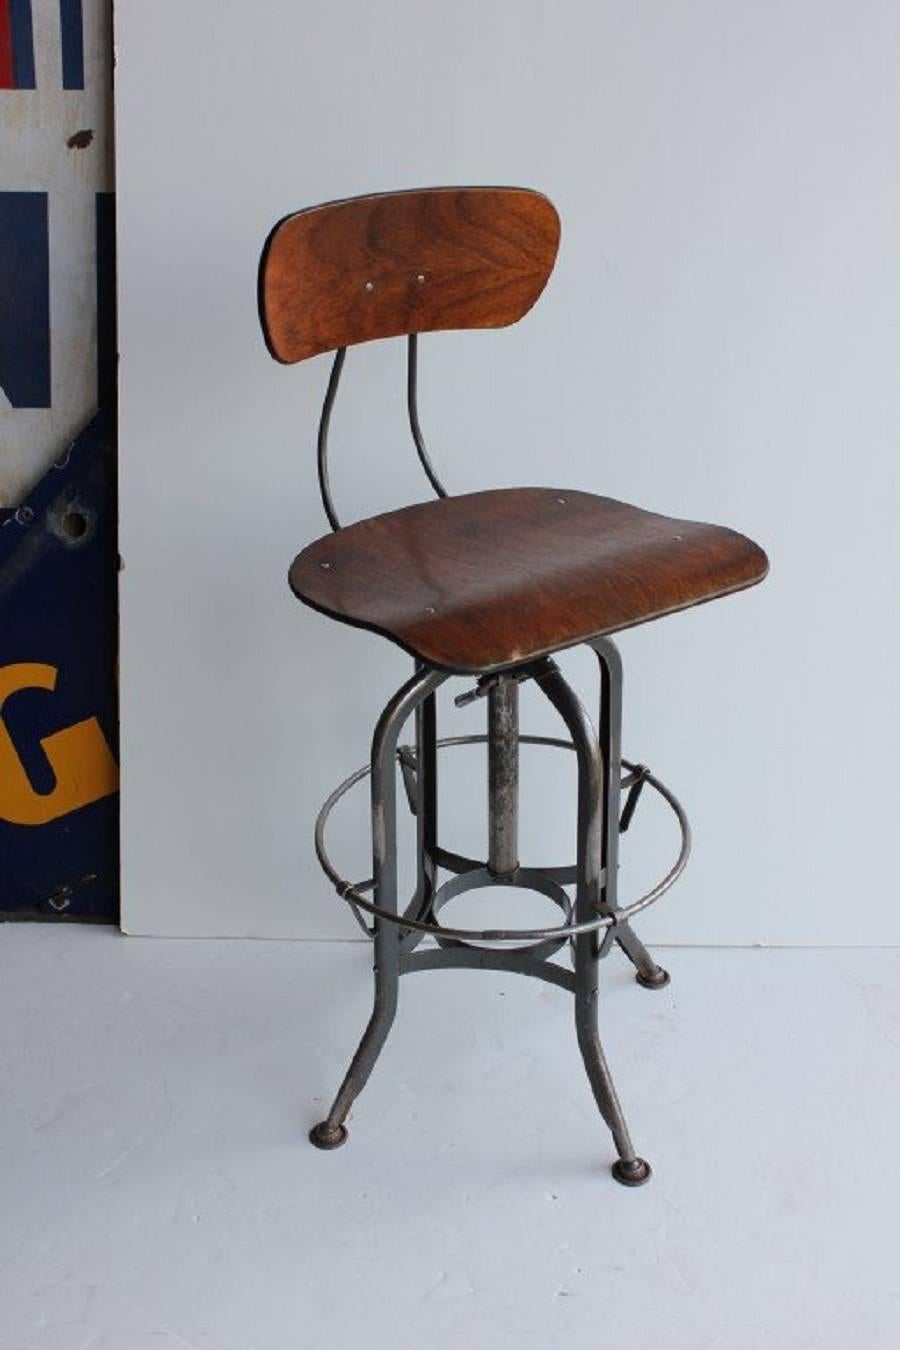 Vintage American Industrial Toledo swivel stool, more available. H seat adjustable from 25